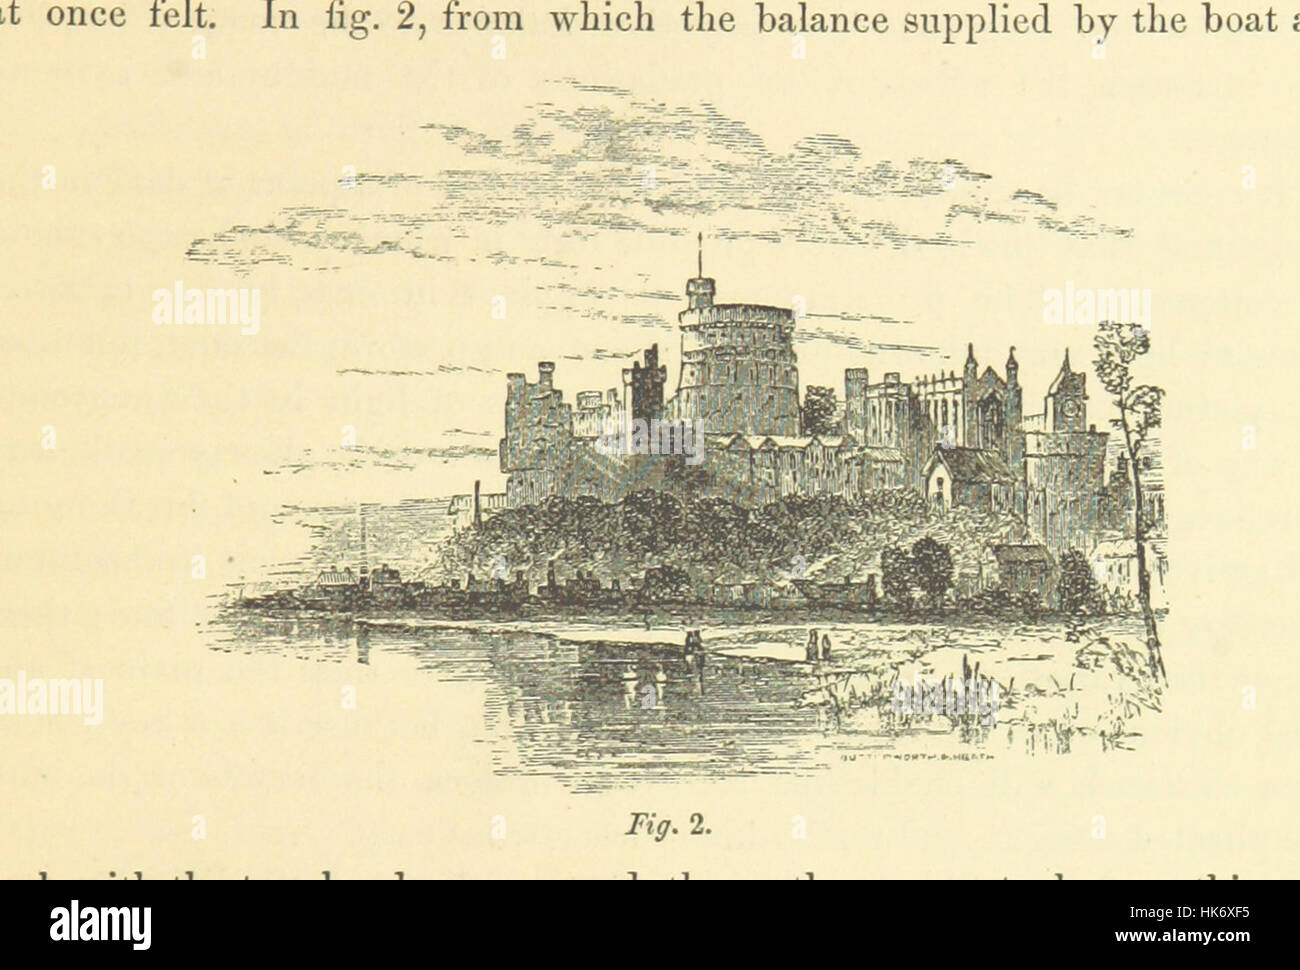 Image taken from page 33 of 'Pictorial Effect in Photography: being hints on composition and chiaroscuro for photographers. To which is added a chapter on combination painting' Image taken from page 33 of 'Pictorial Effect in Stock Photo